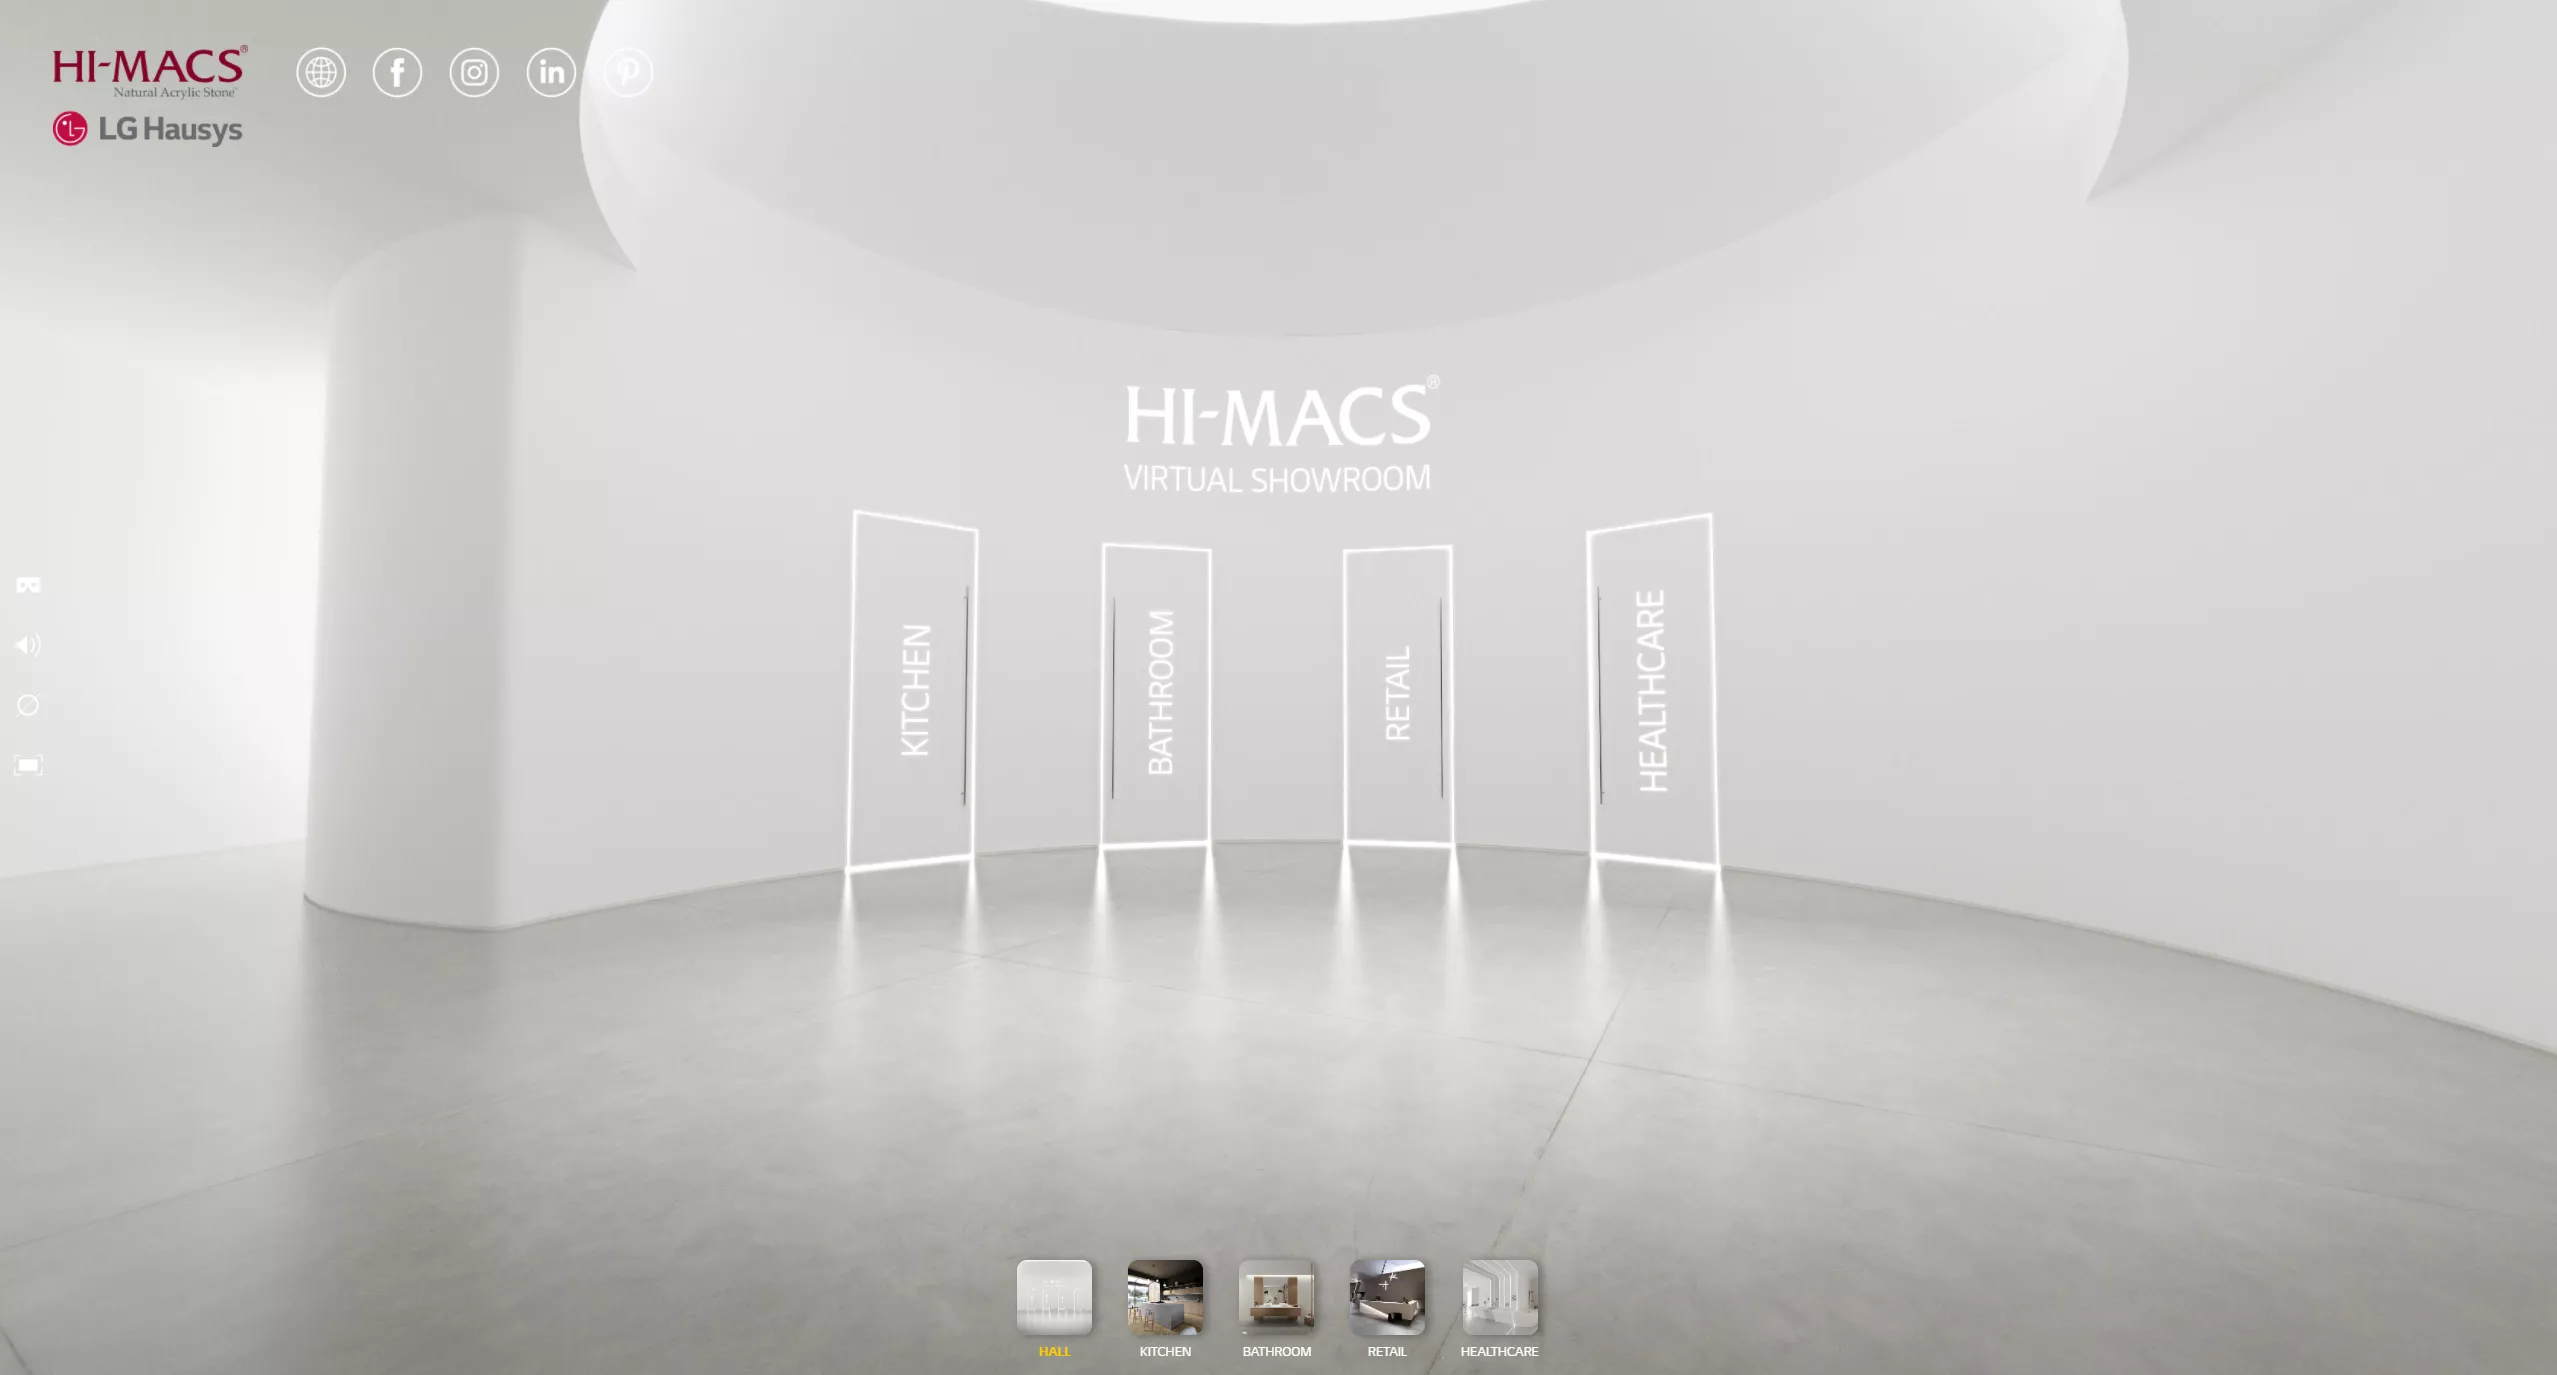 HIMACS launches brand new interactive virtual showroom